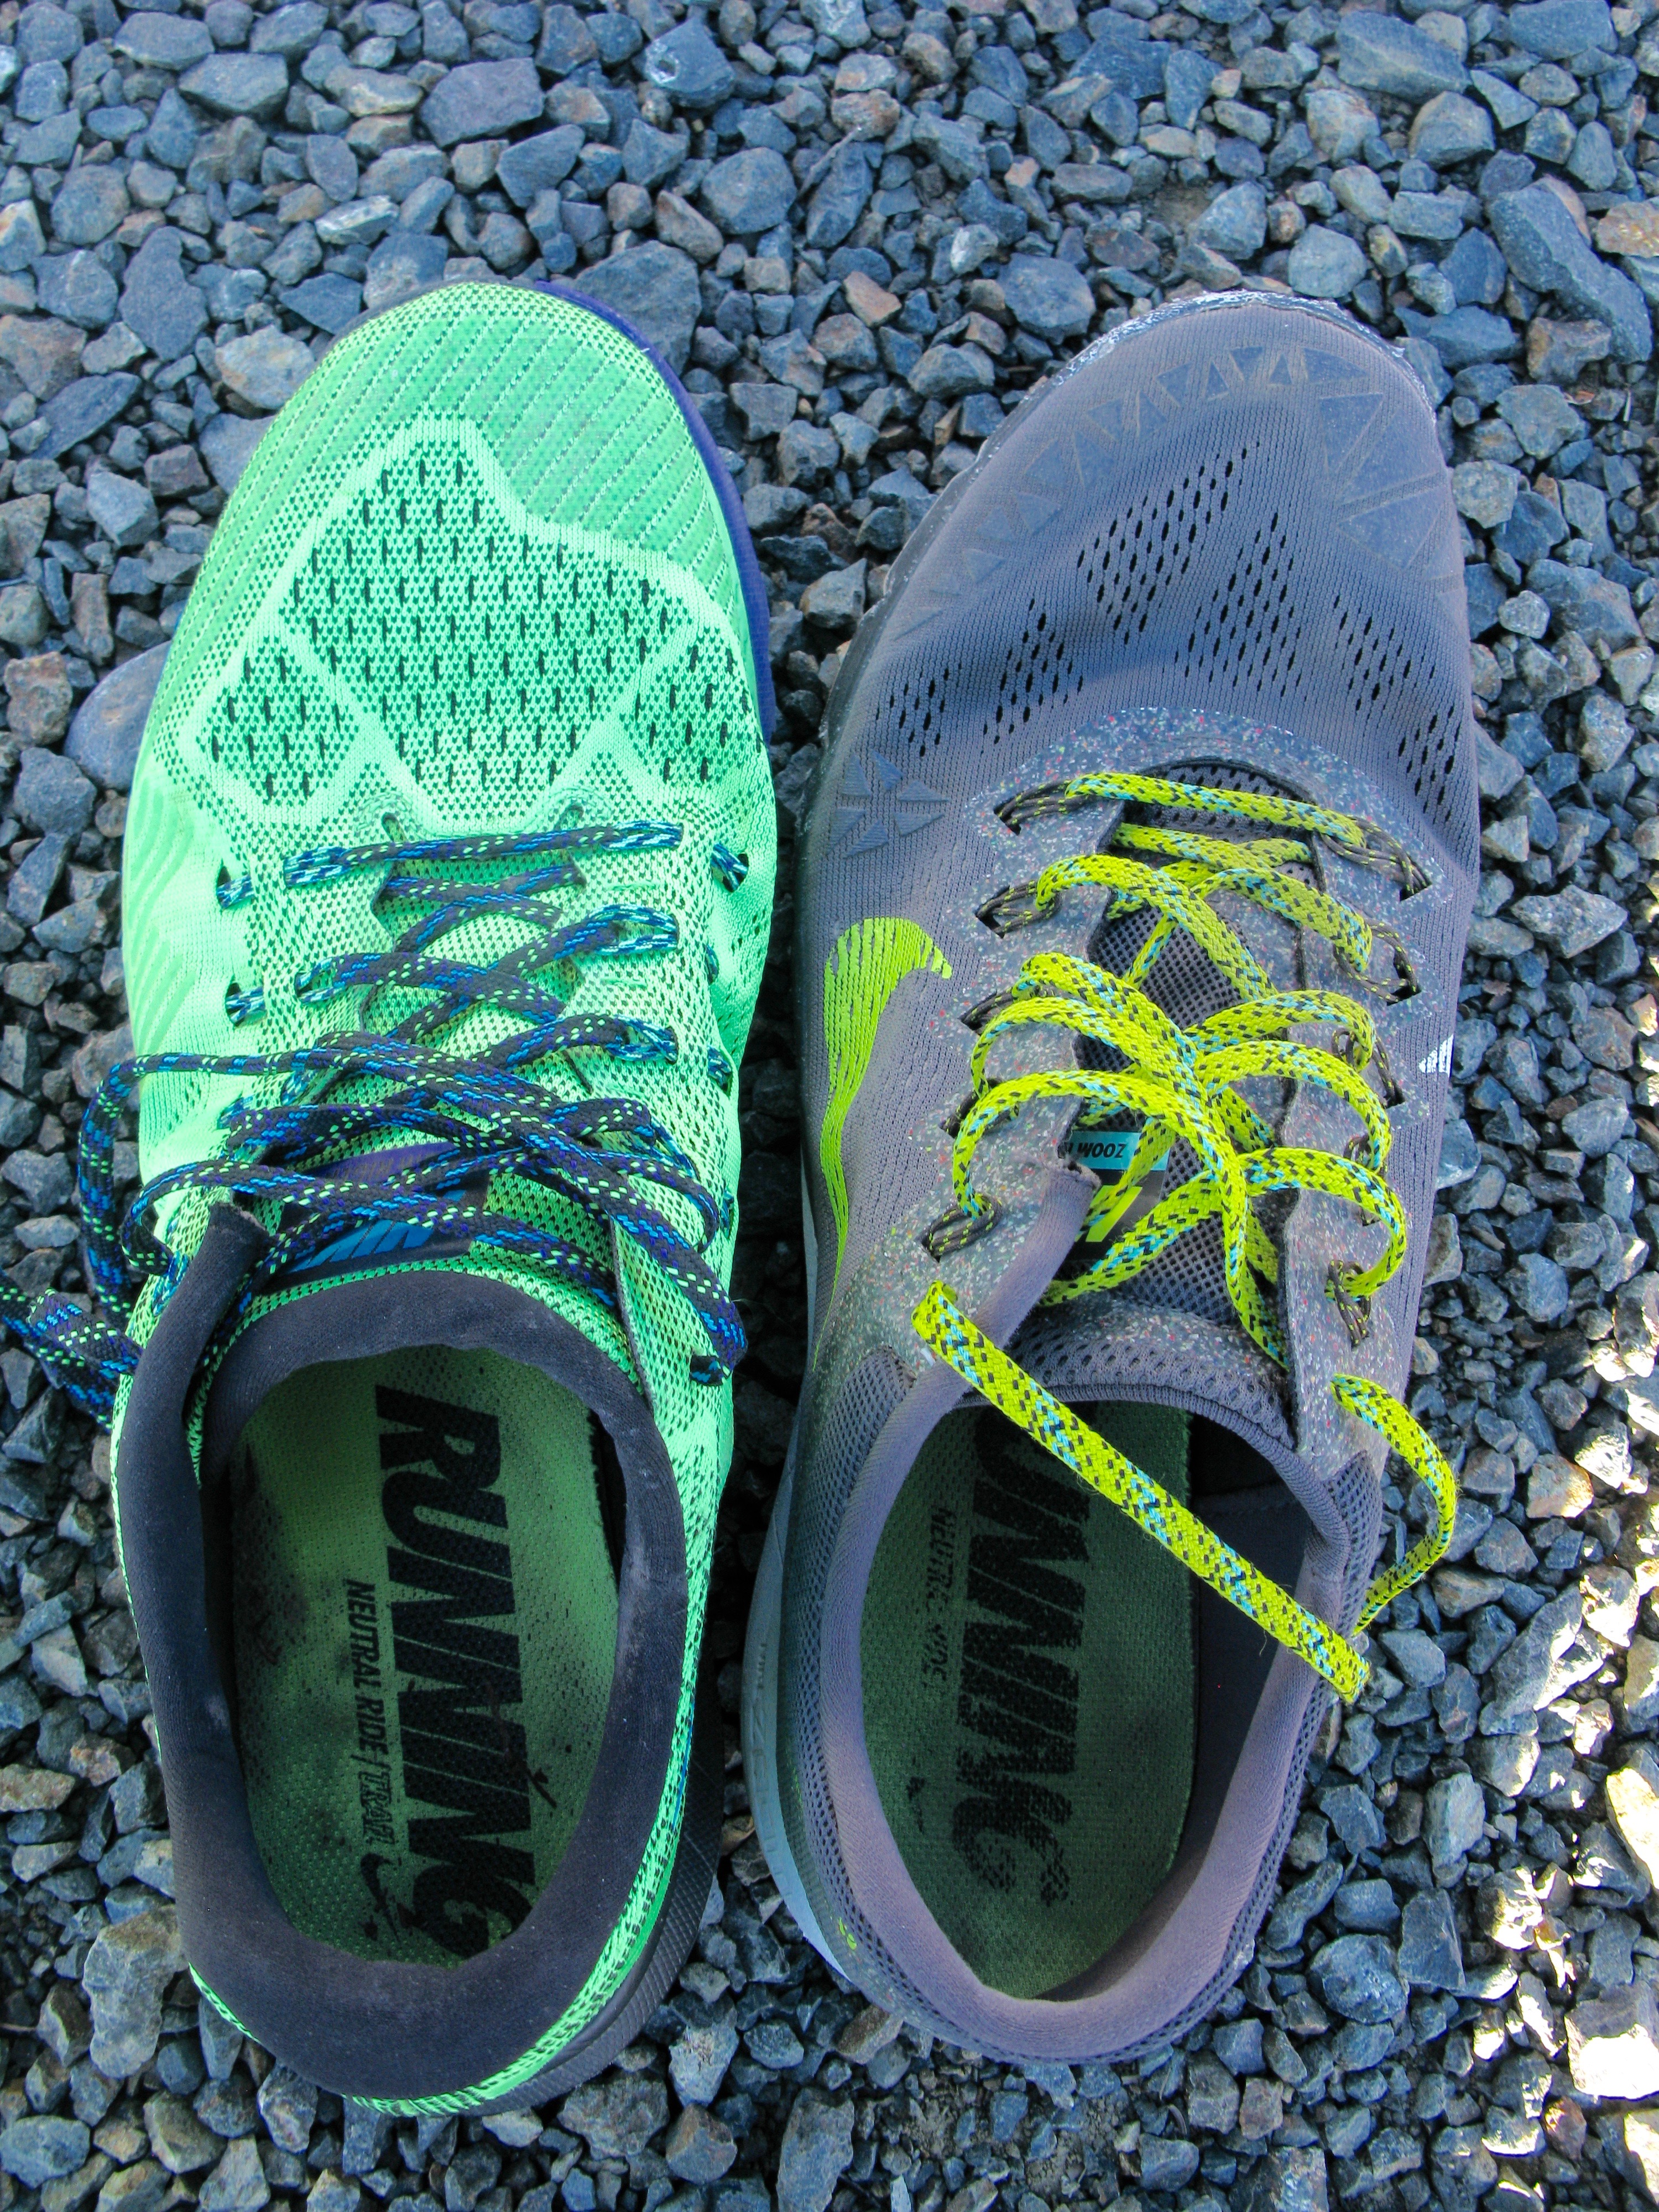 Nike Zoom Terra Kiger 3 Review: Better Update to Wildhorse 2?